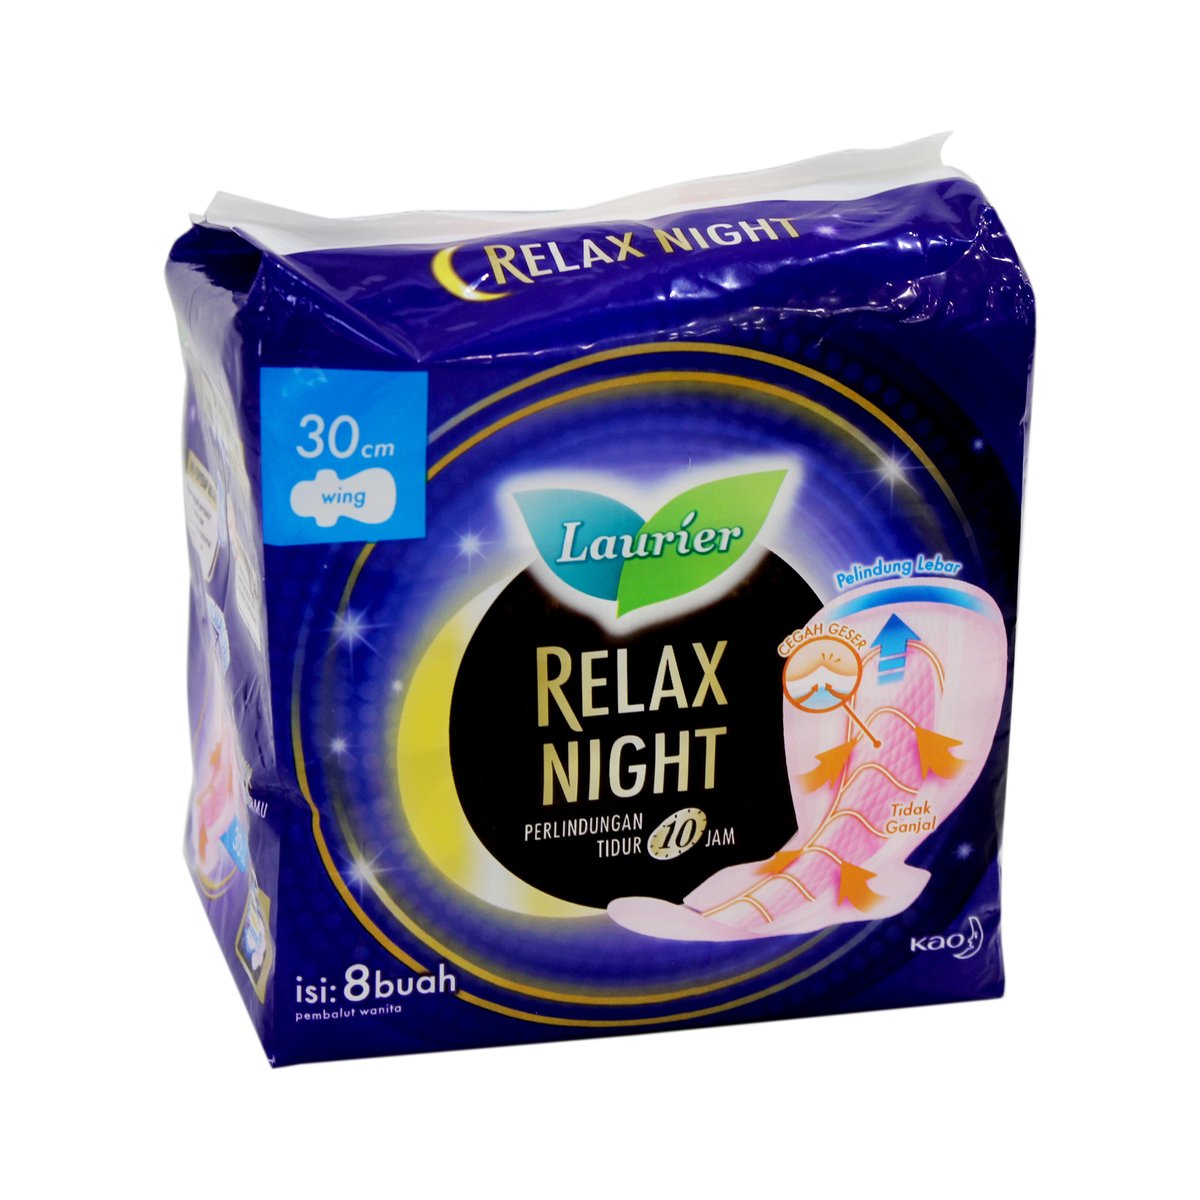 Laurier Relax Night 30cm 8pcs